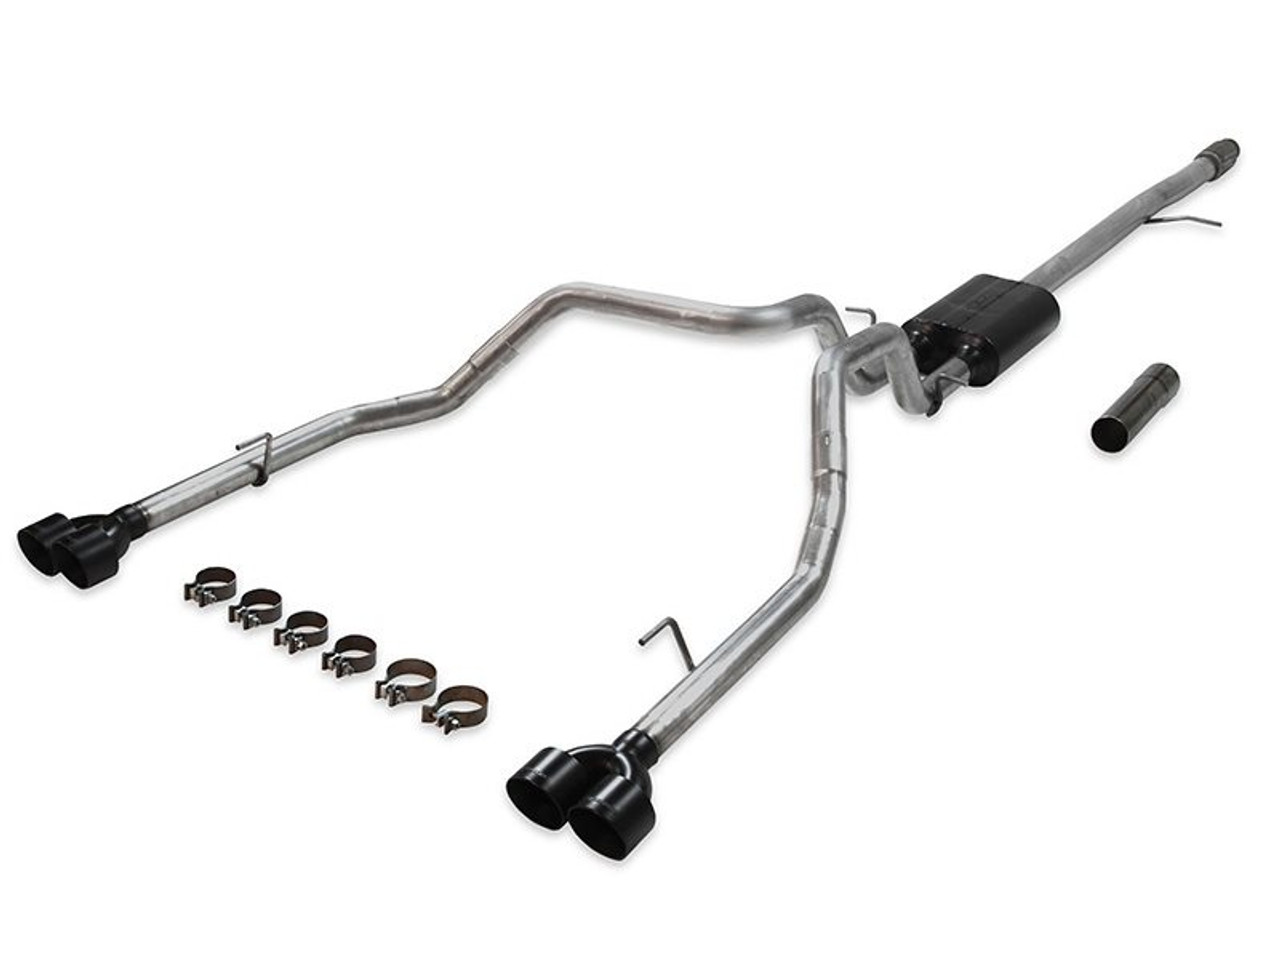 Flowmaster American Thunder Cat-Back Exhaust System Review